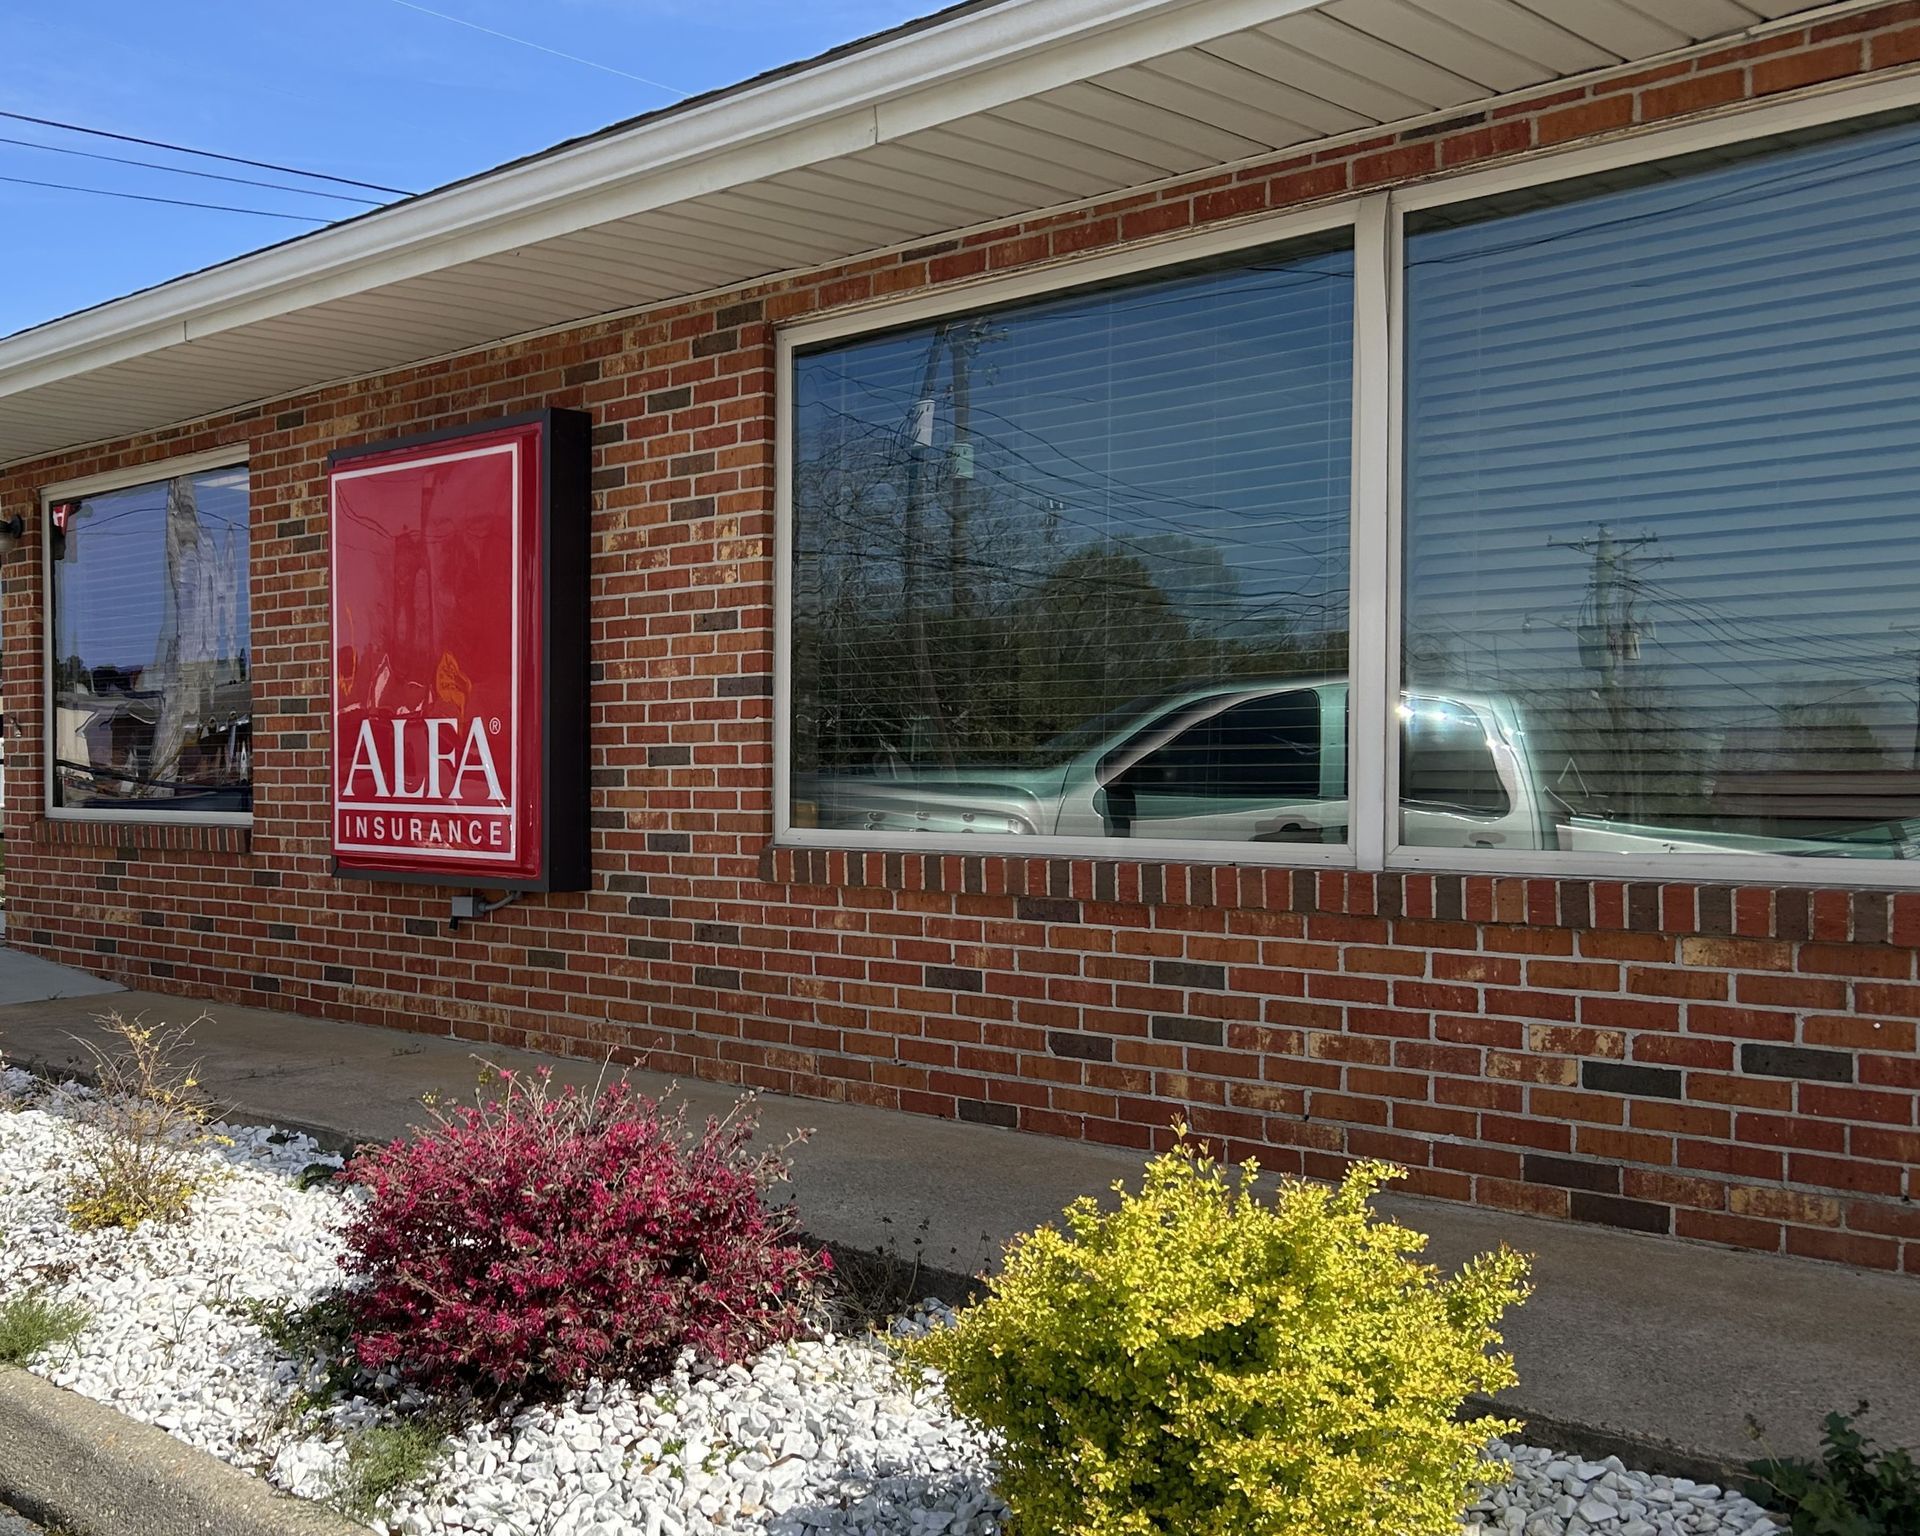 Sun blocking tint adding one-way privacy - bright Sun beamed through the storefront office windows at Alfa Insurance. Prior to SPF Tinting service in Troy, AL